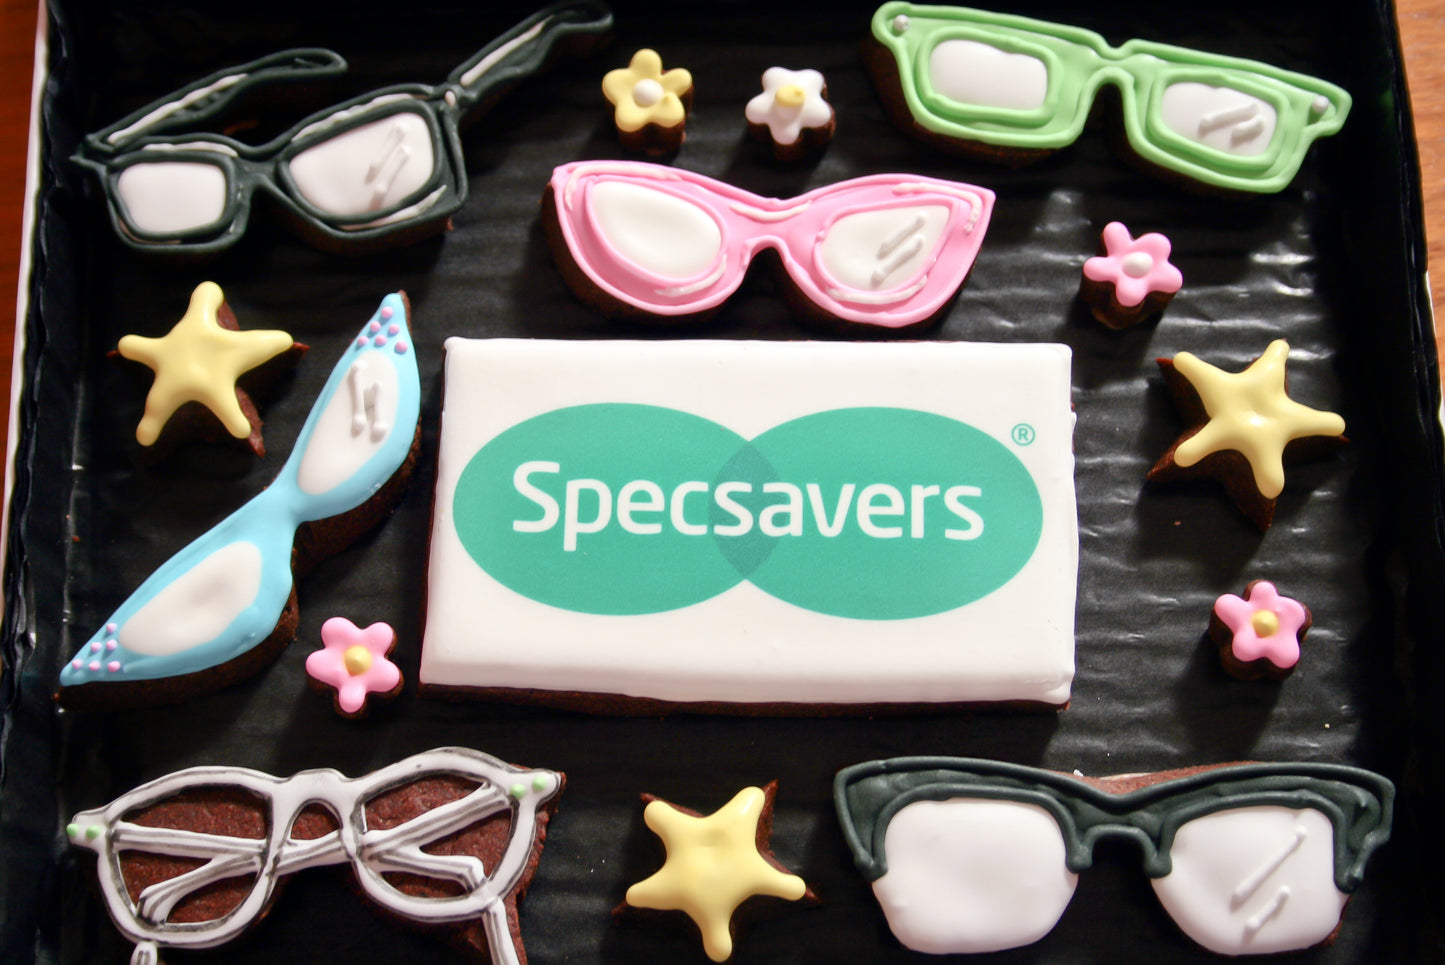 glasses cookies for supersavers. Specsavers corporate logo biscuits. Custom biscuit box with multicoloured glasses. Sepcsavers cookies and biscuits.